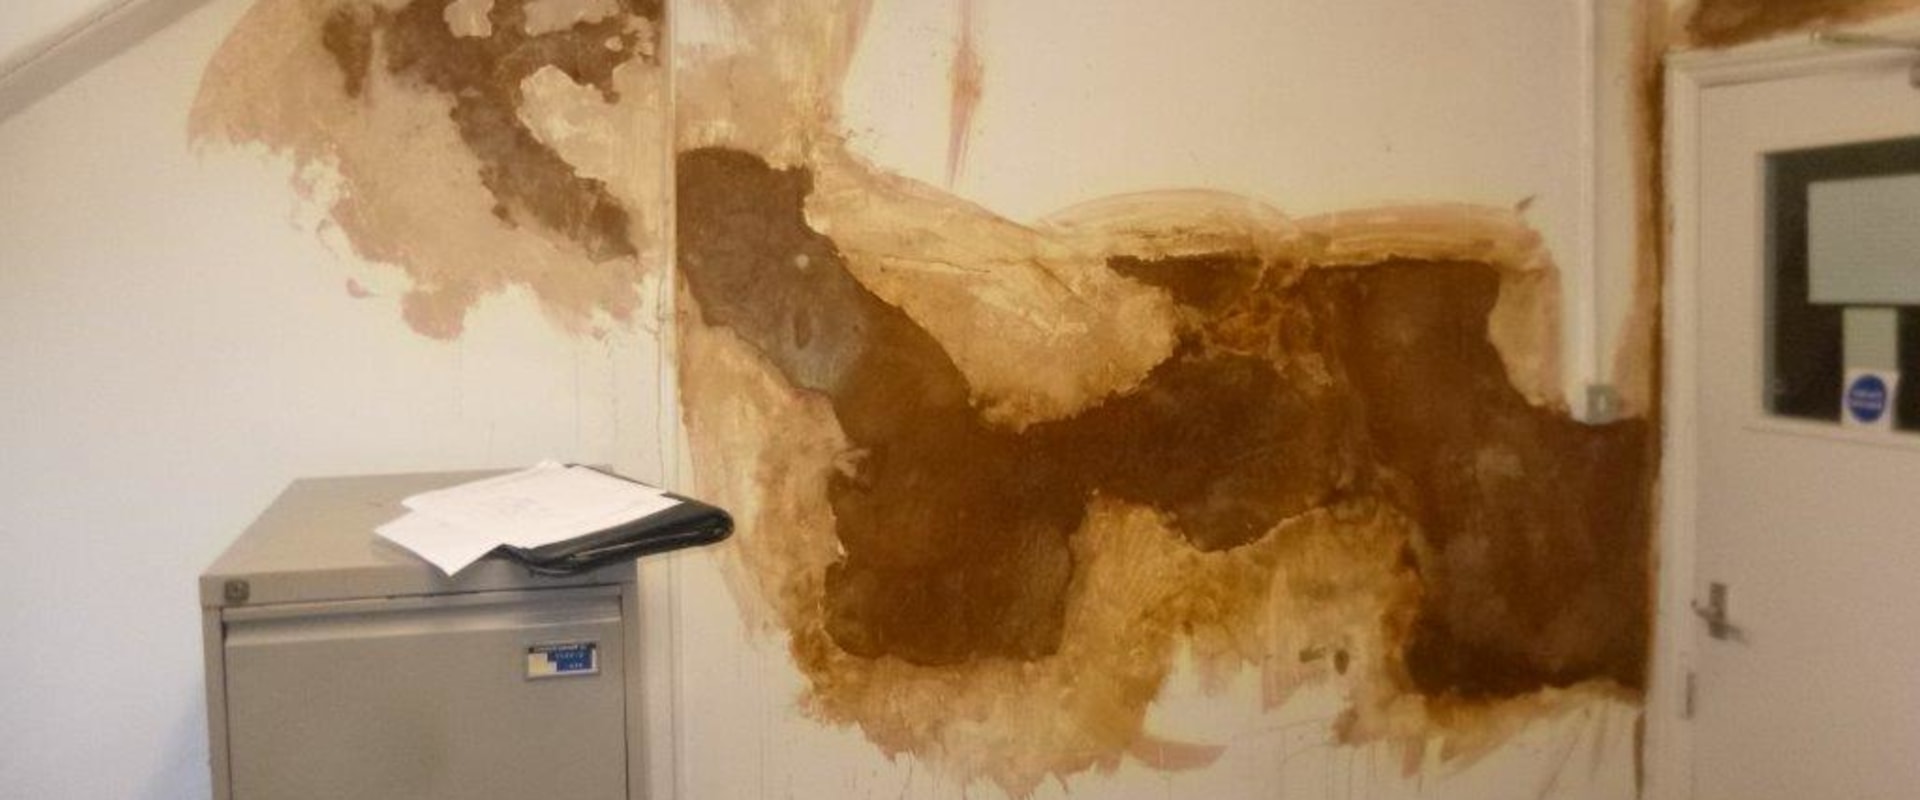 What happens to plaster walls when they get wet?